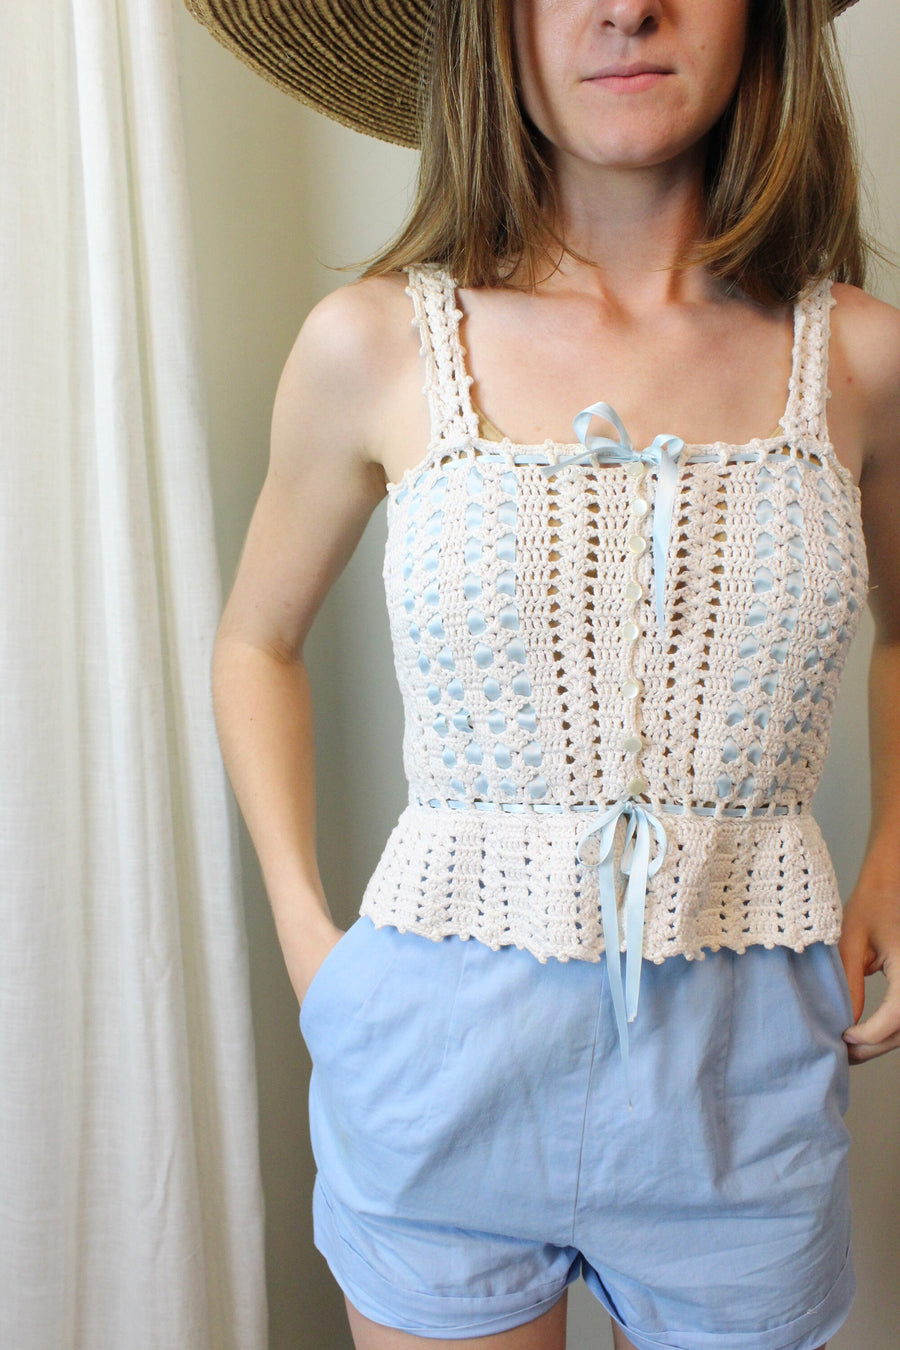 EDWARDIAN antique top crochet lace camisole xs | new spring